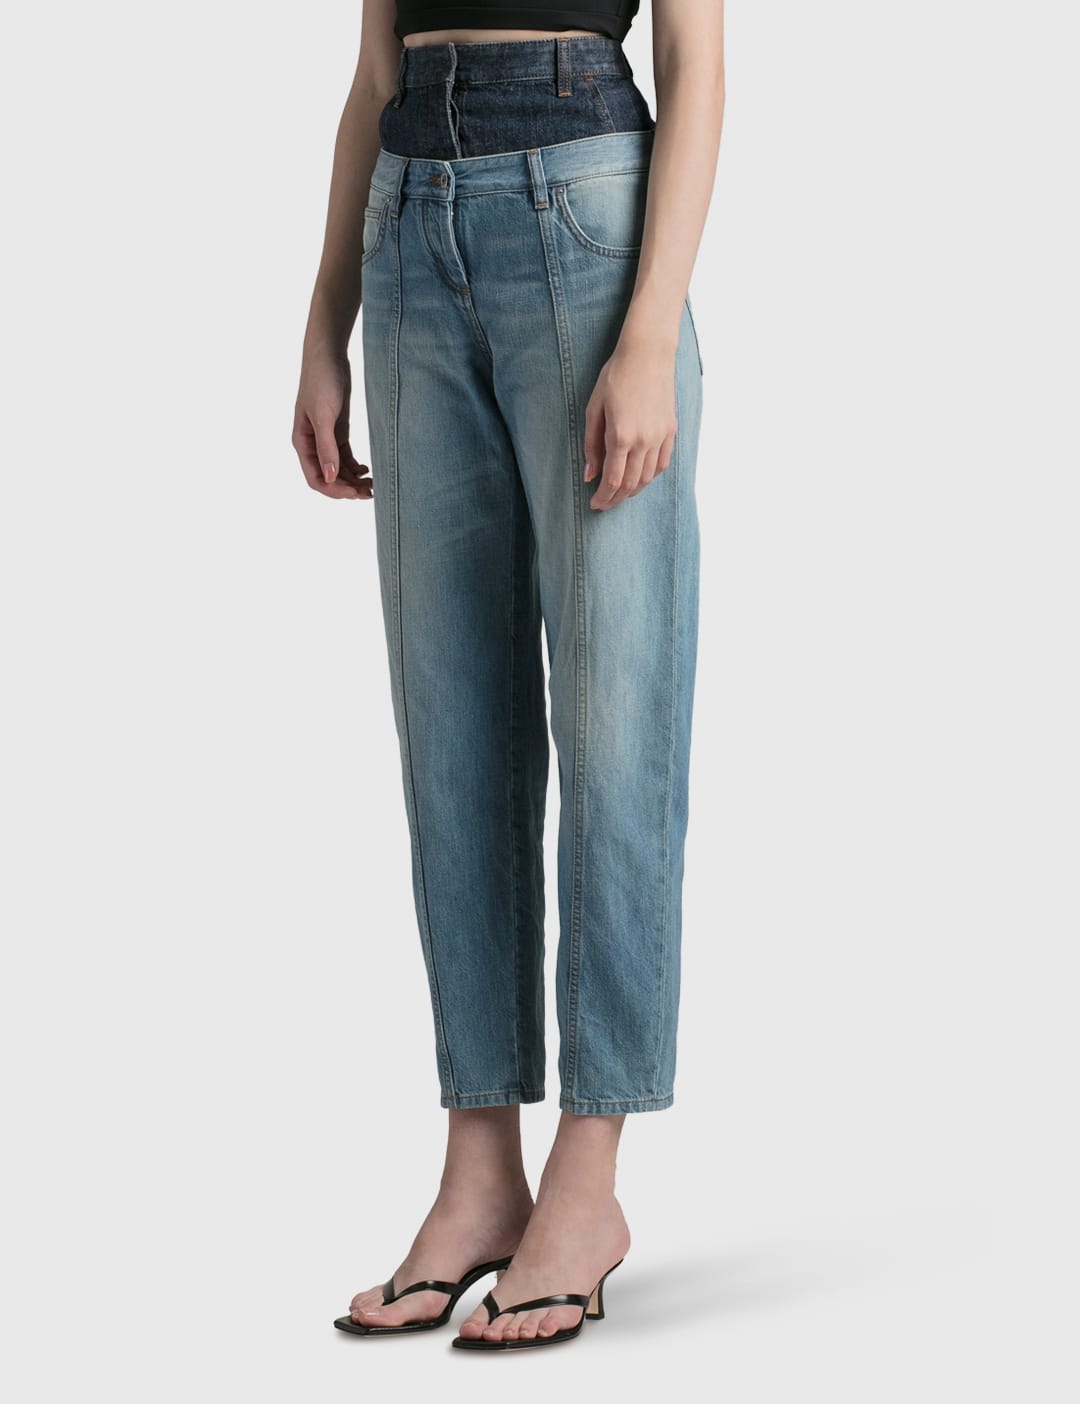 Loewe - Trompe L'oeil Jeans | HBX - Globally Curated Fashion and 